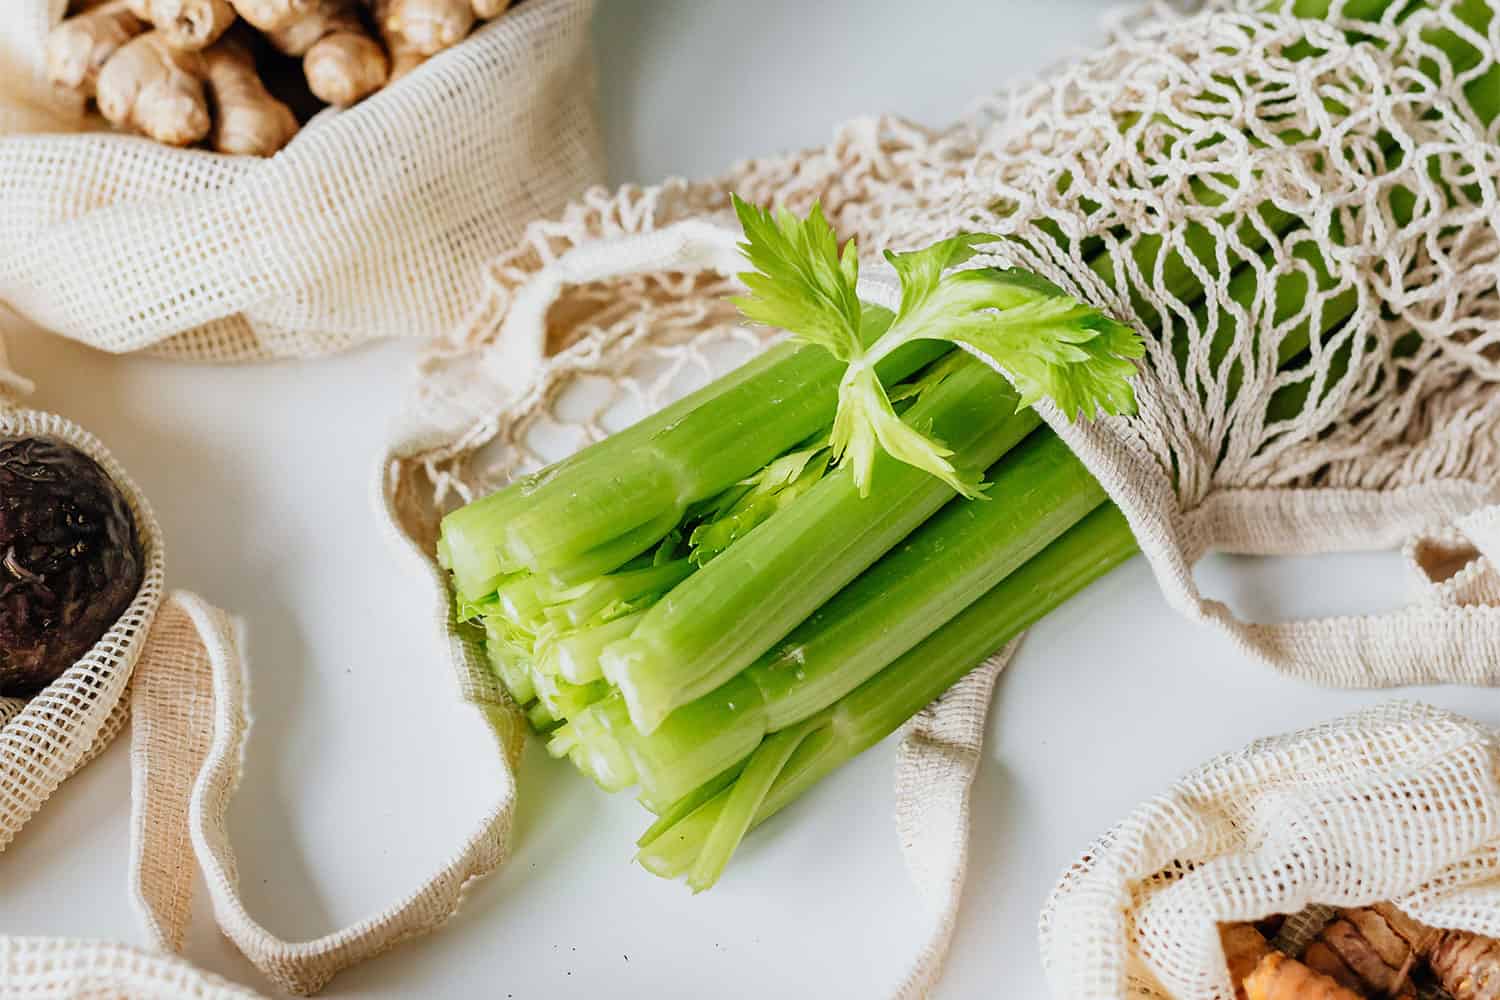 How To Keep Celery Fresh In Refrigerator